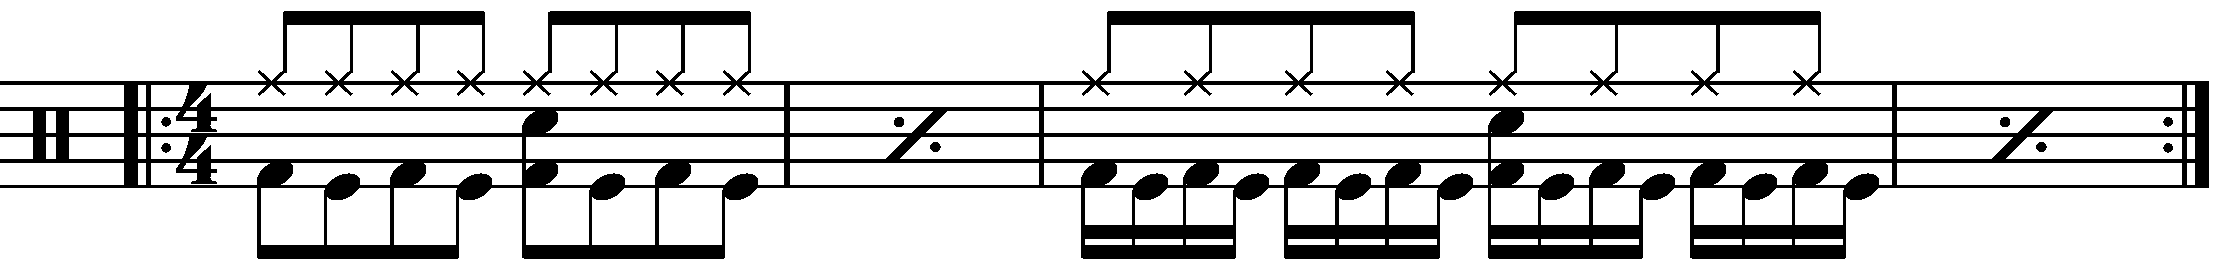 8th Note to 16th Note Double kick groove exercise.